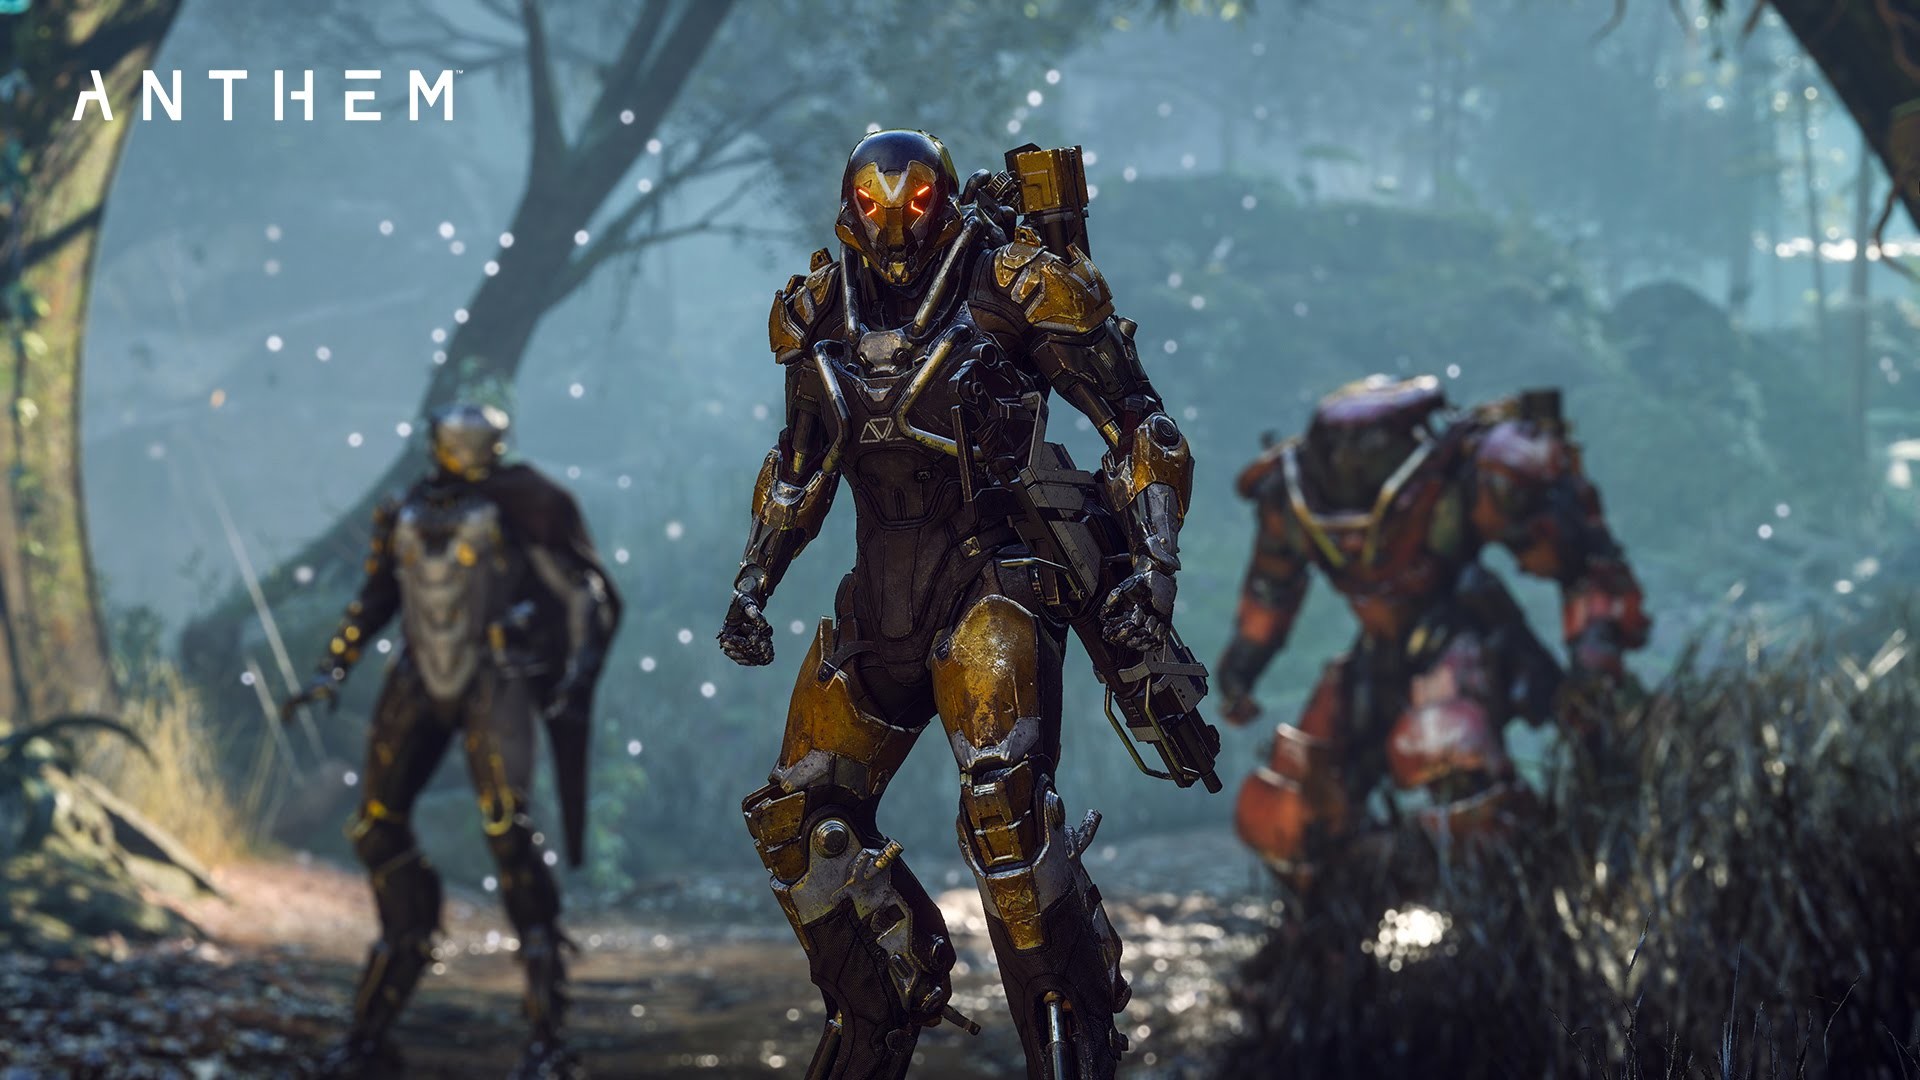 1920x1080 Anthem Upcoming New Game for PC HD Wallpapers Images